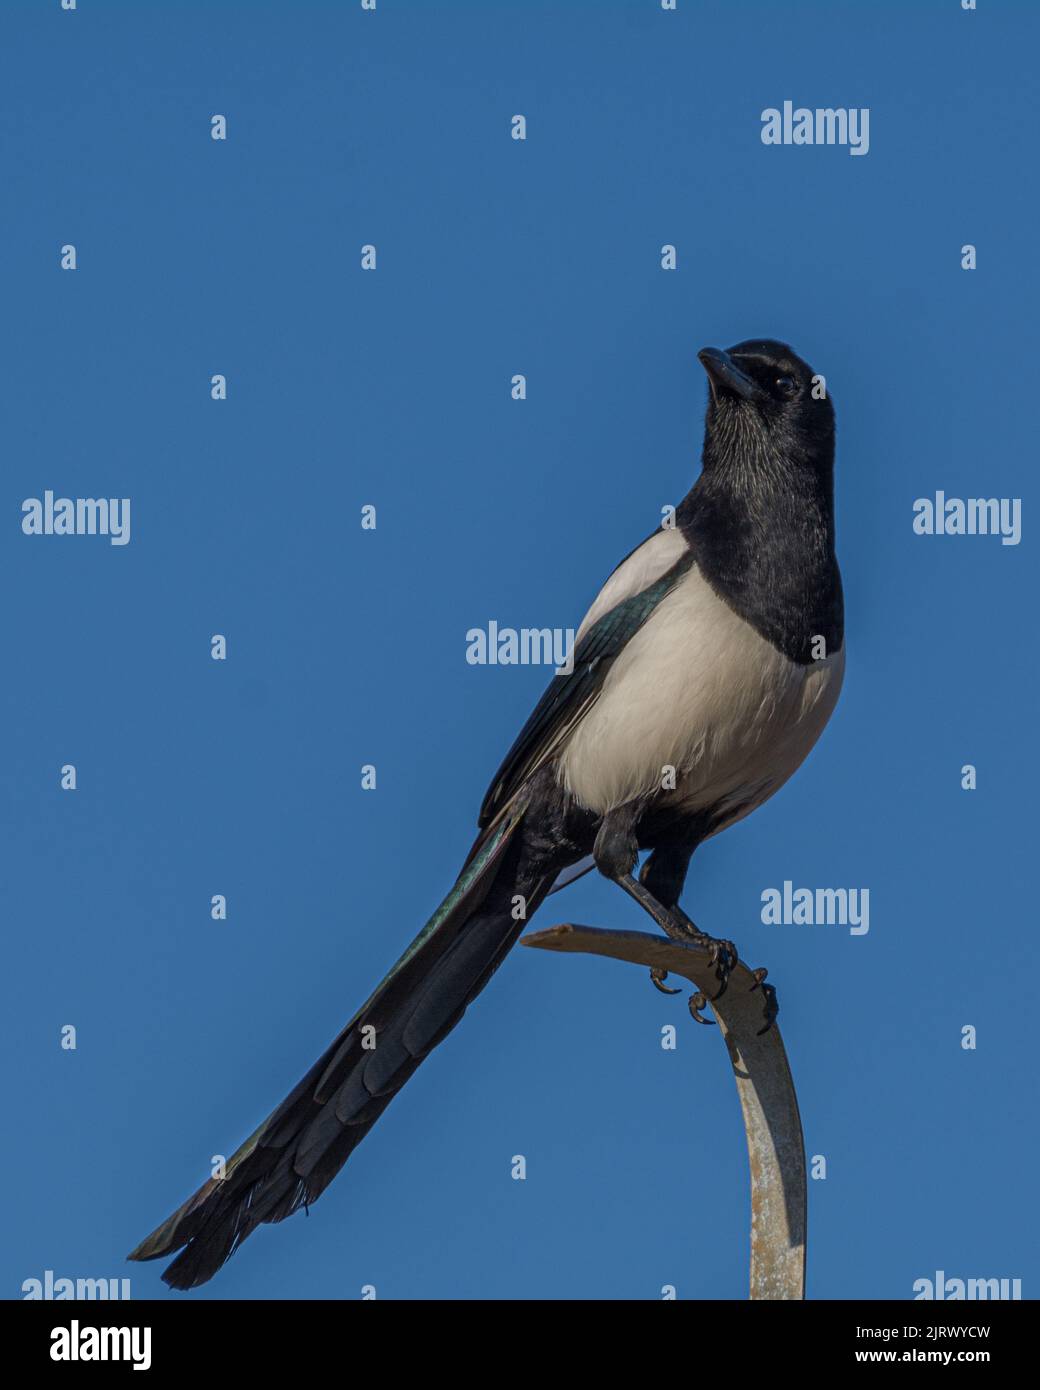 Black & white magpie bird from below with blue sky in background Stock Photo